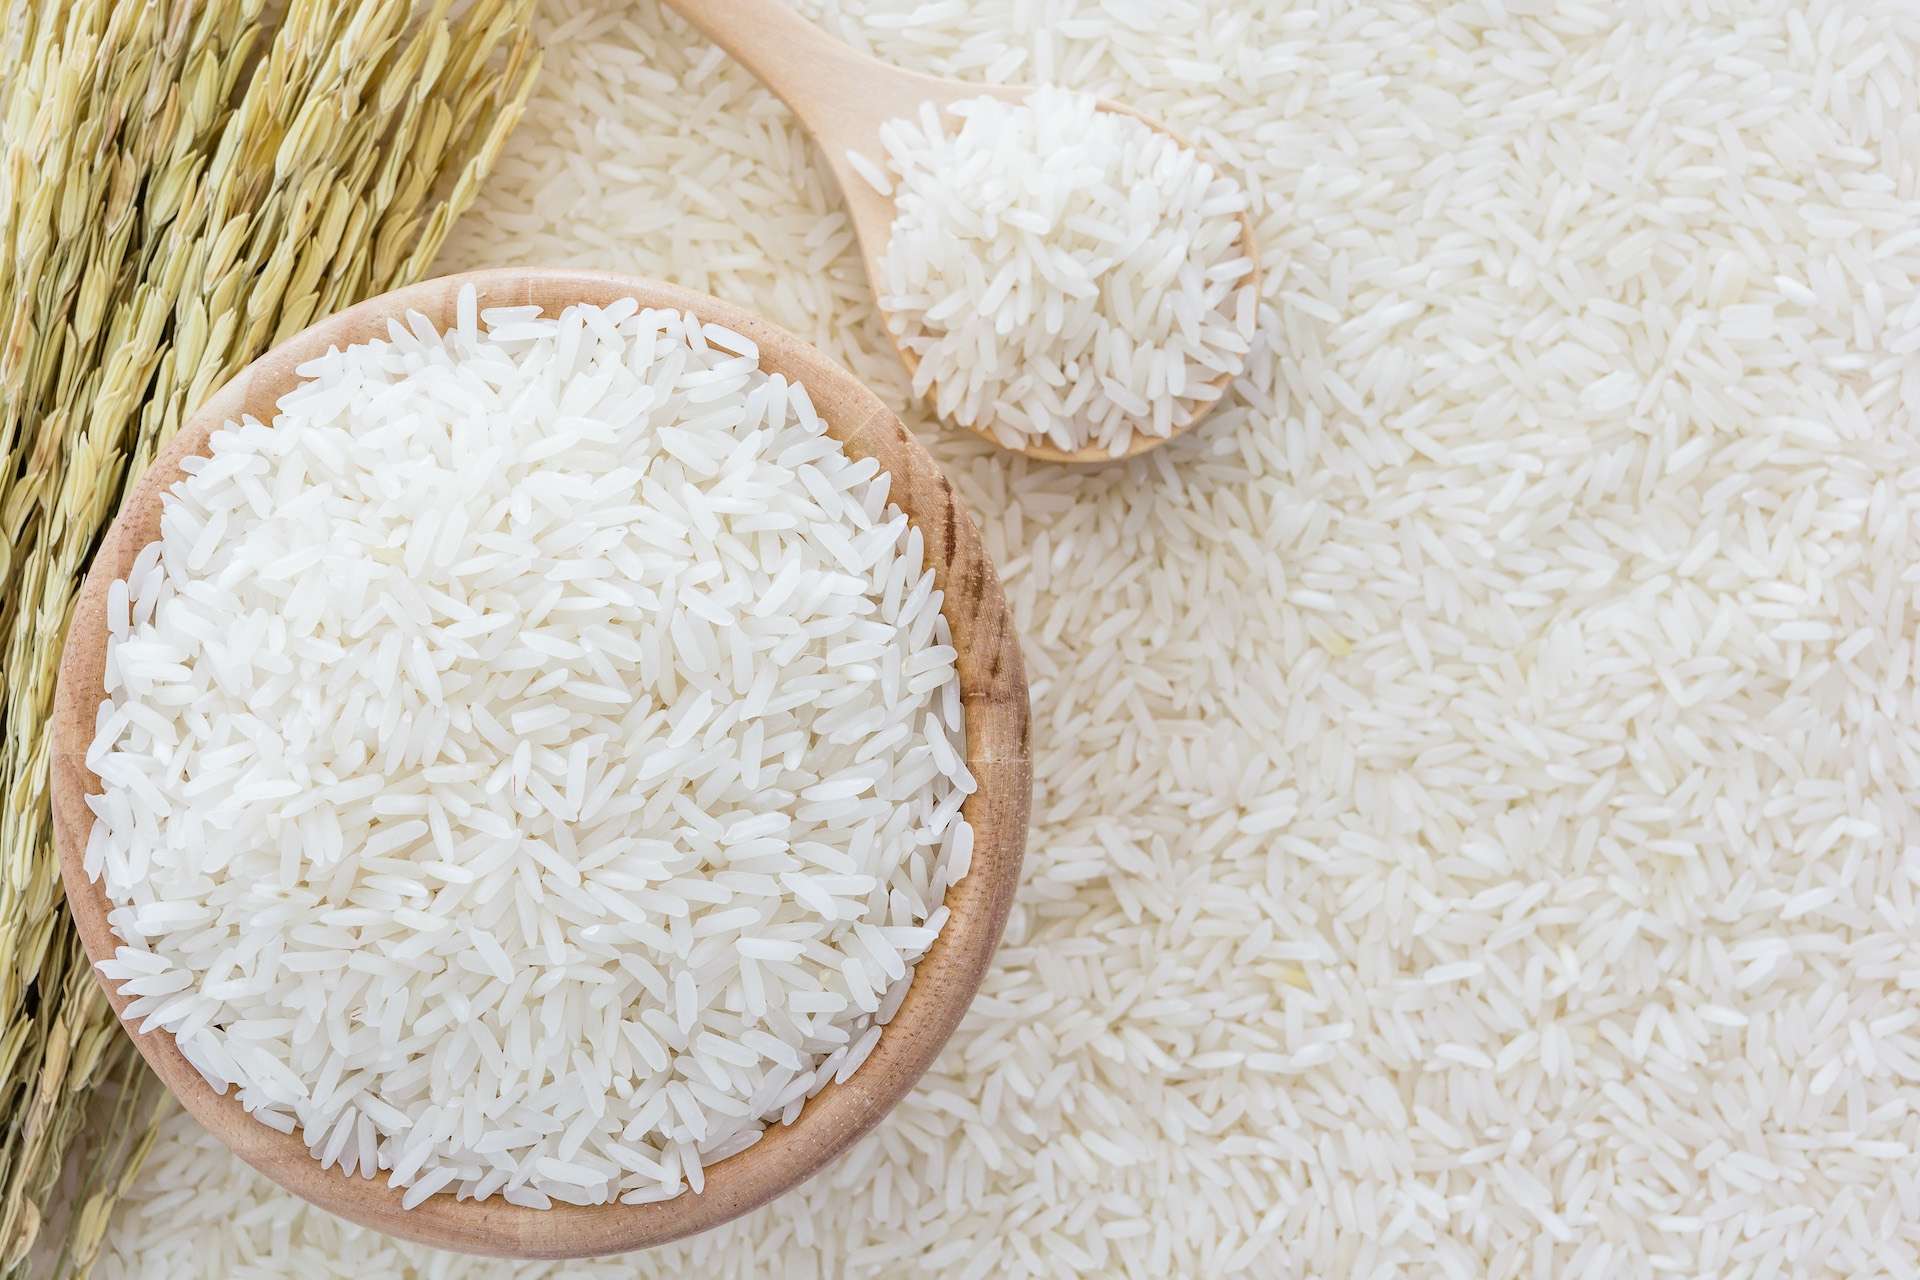 No more Indian basmati rice or tea for Iran as both nations discuss a rupee trade deal